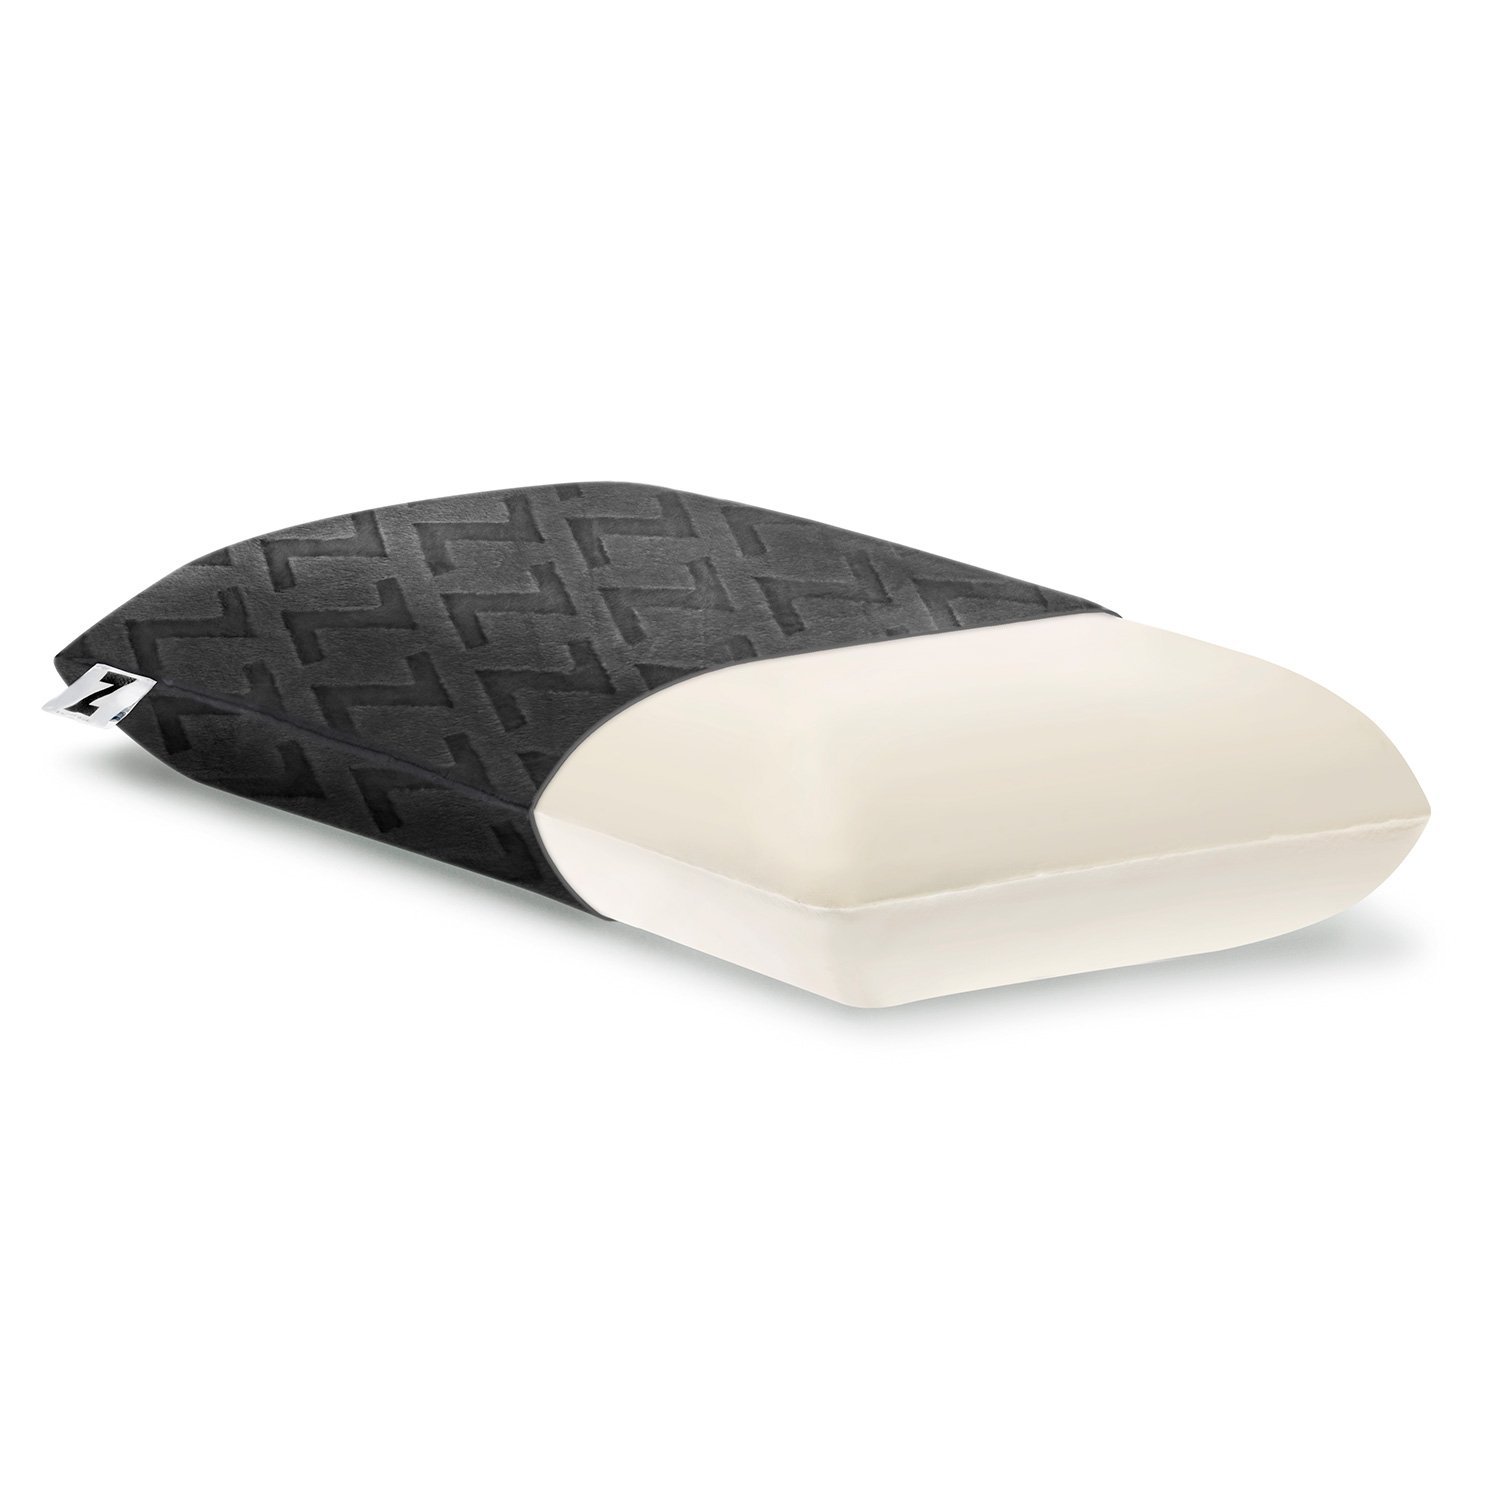 Buy Top 10 Travel Pillows Online At Lowest Prices